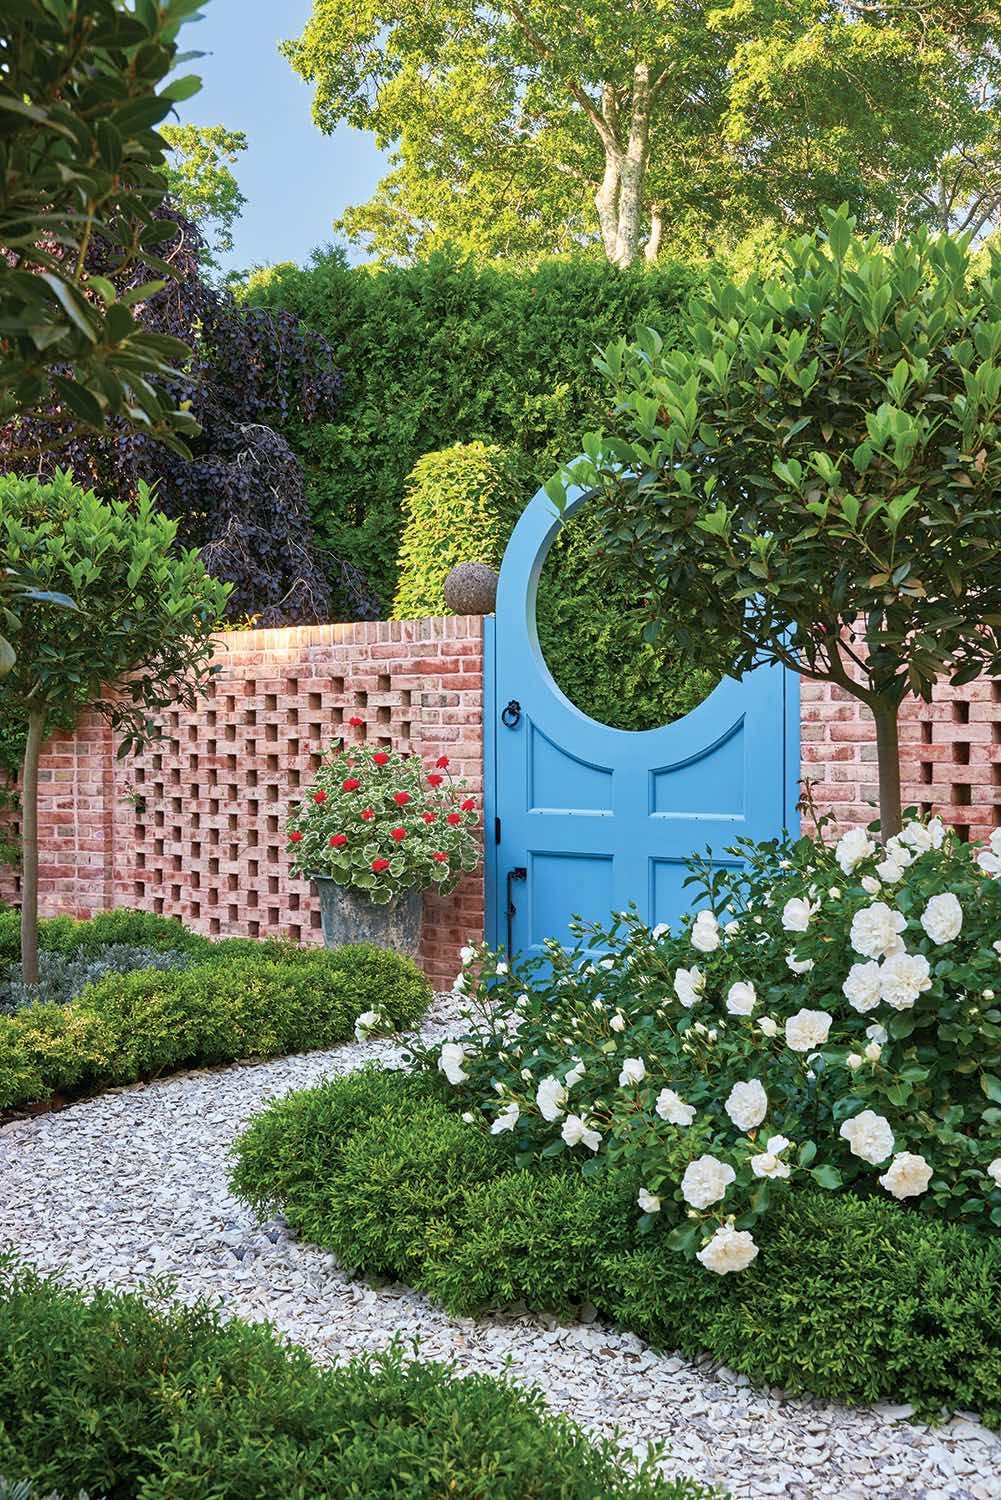 Hidcote Estate and Nancy Lancaster's Haseley Court, both in the English countryside, inspired the color of the moon gate in the kitchen garden.